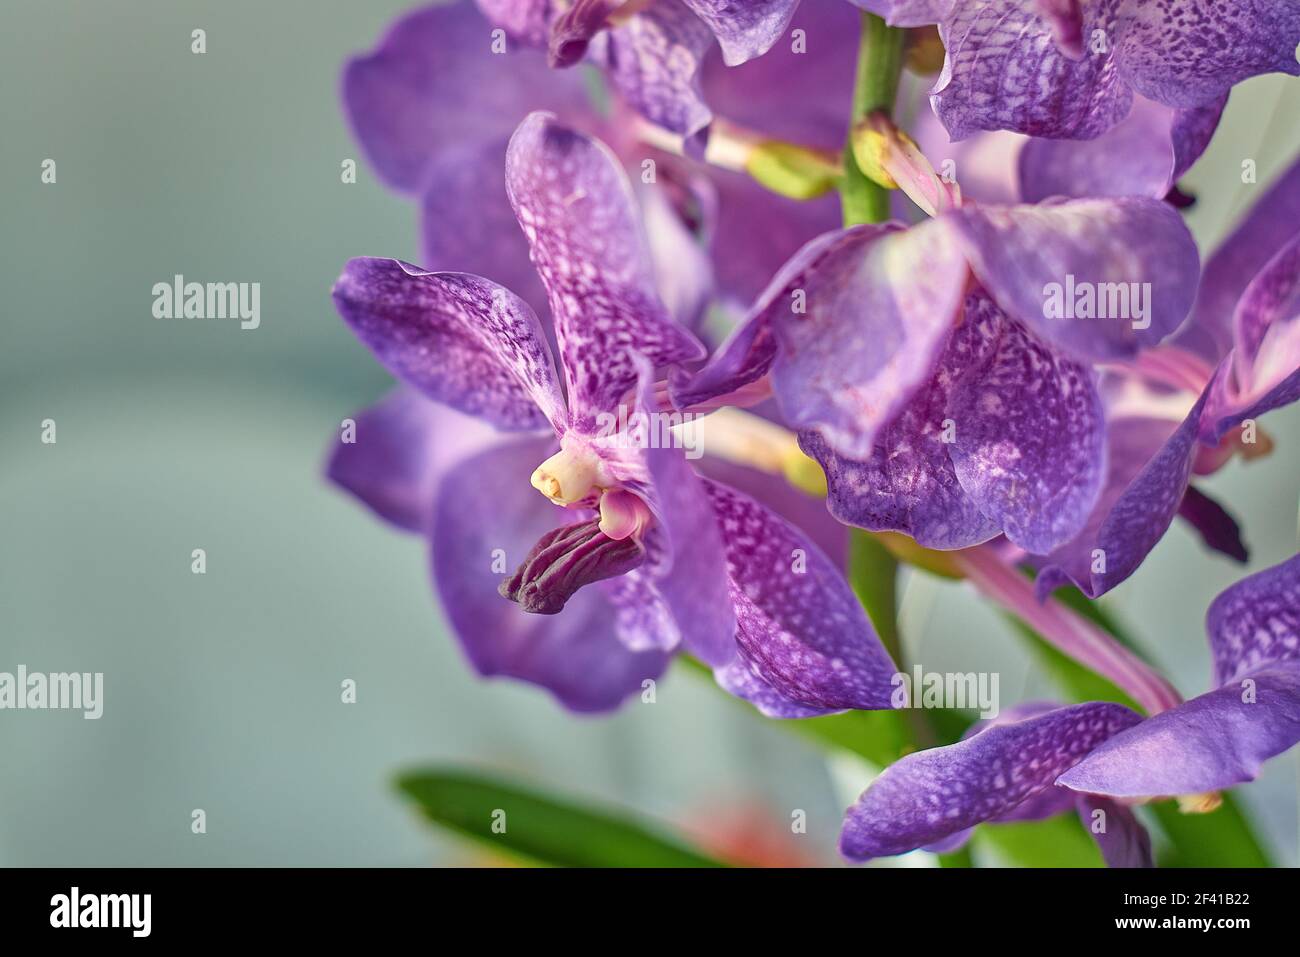 Detail of the flower of the violet vanda orchid plant, a very spring houseplant. Stock Photo